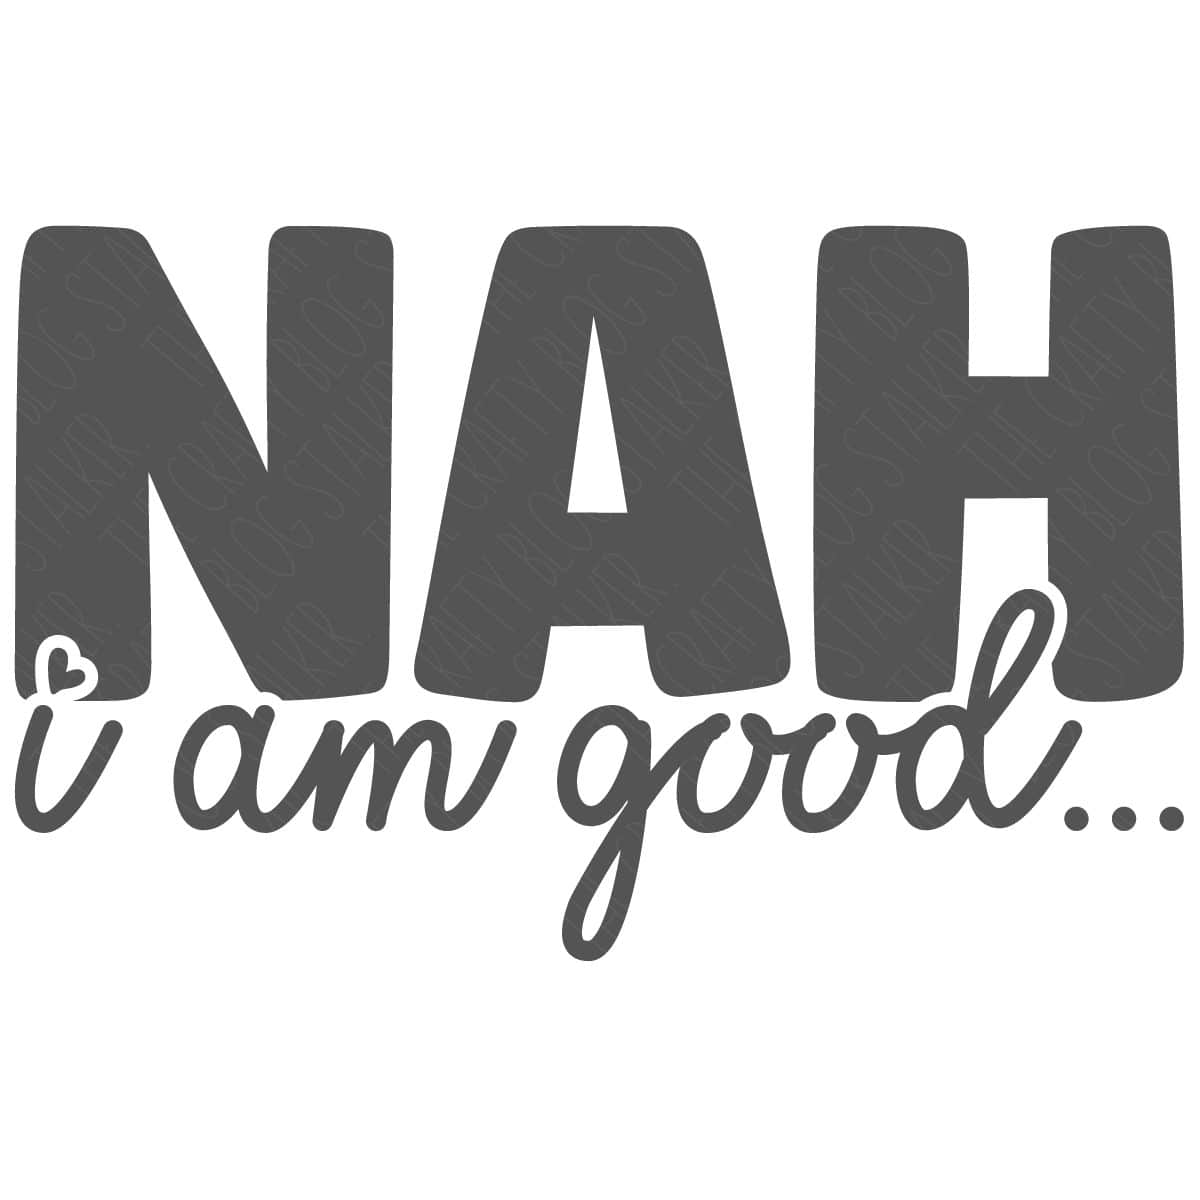 Nah I am Good SVG Cut File	

			
		
	

		
			$3.00 – Buy Now Checkout
							
					
						
							
						
						Added to cart